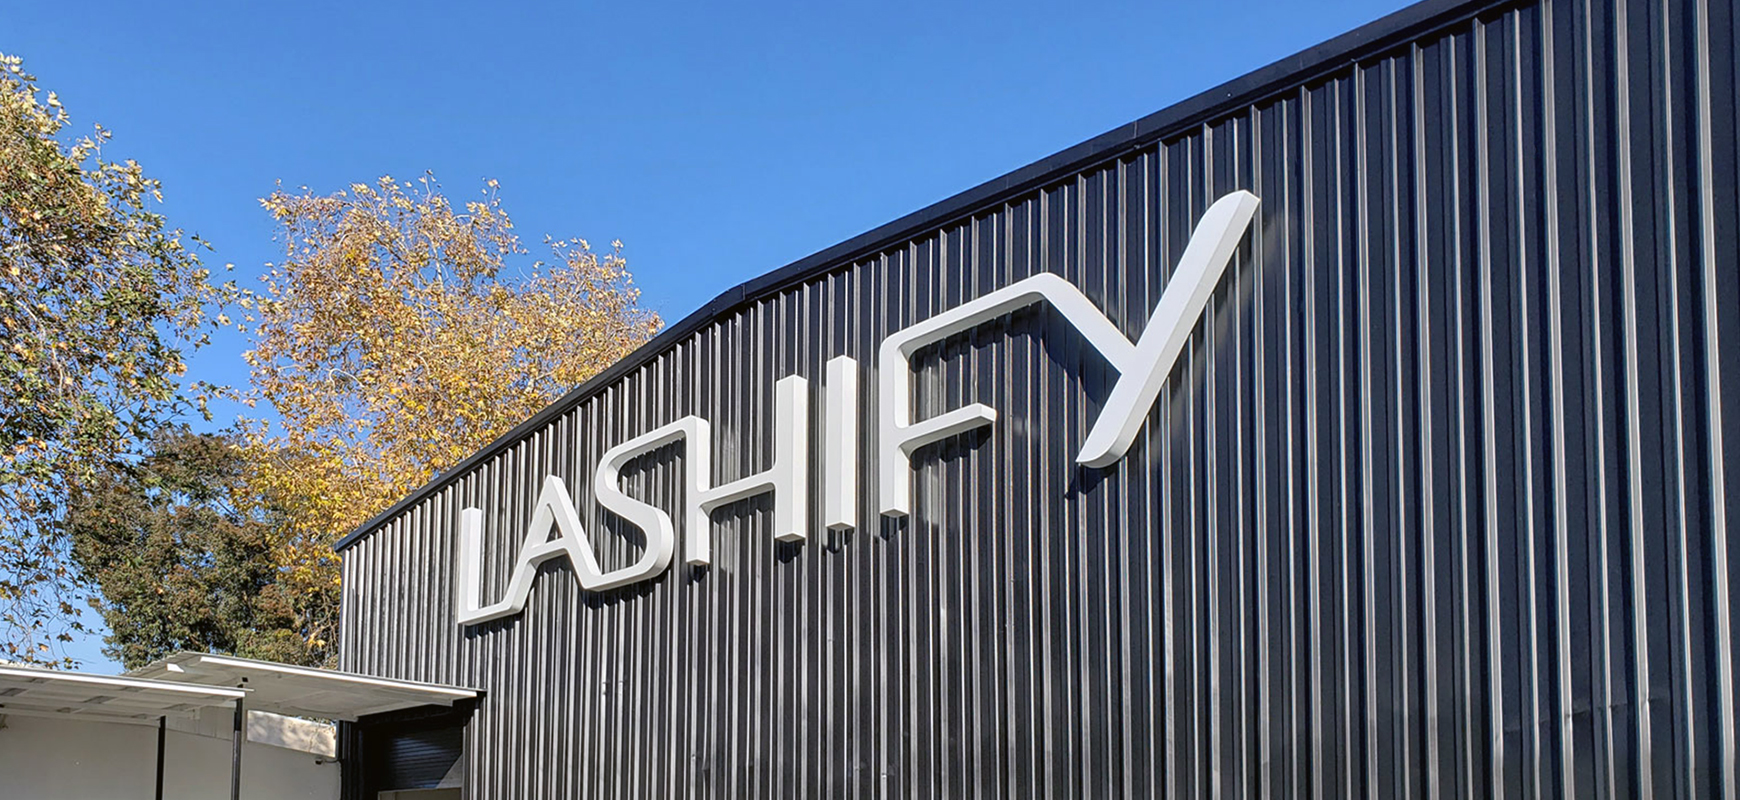 Lashify building top signage in white made of acrylic and aluminum